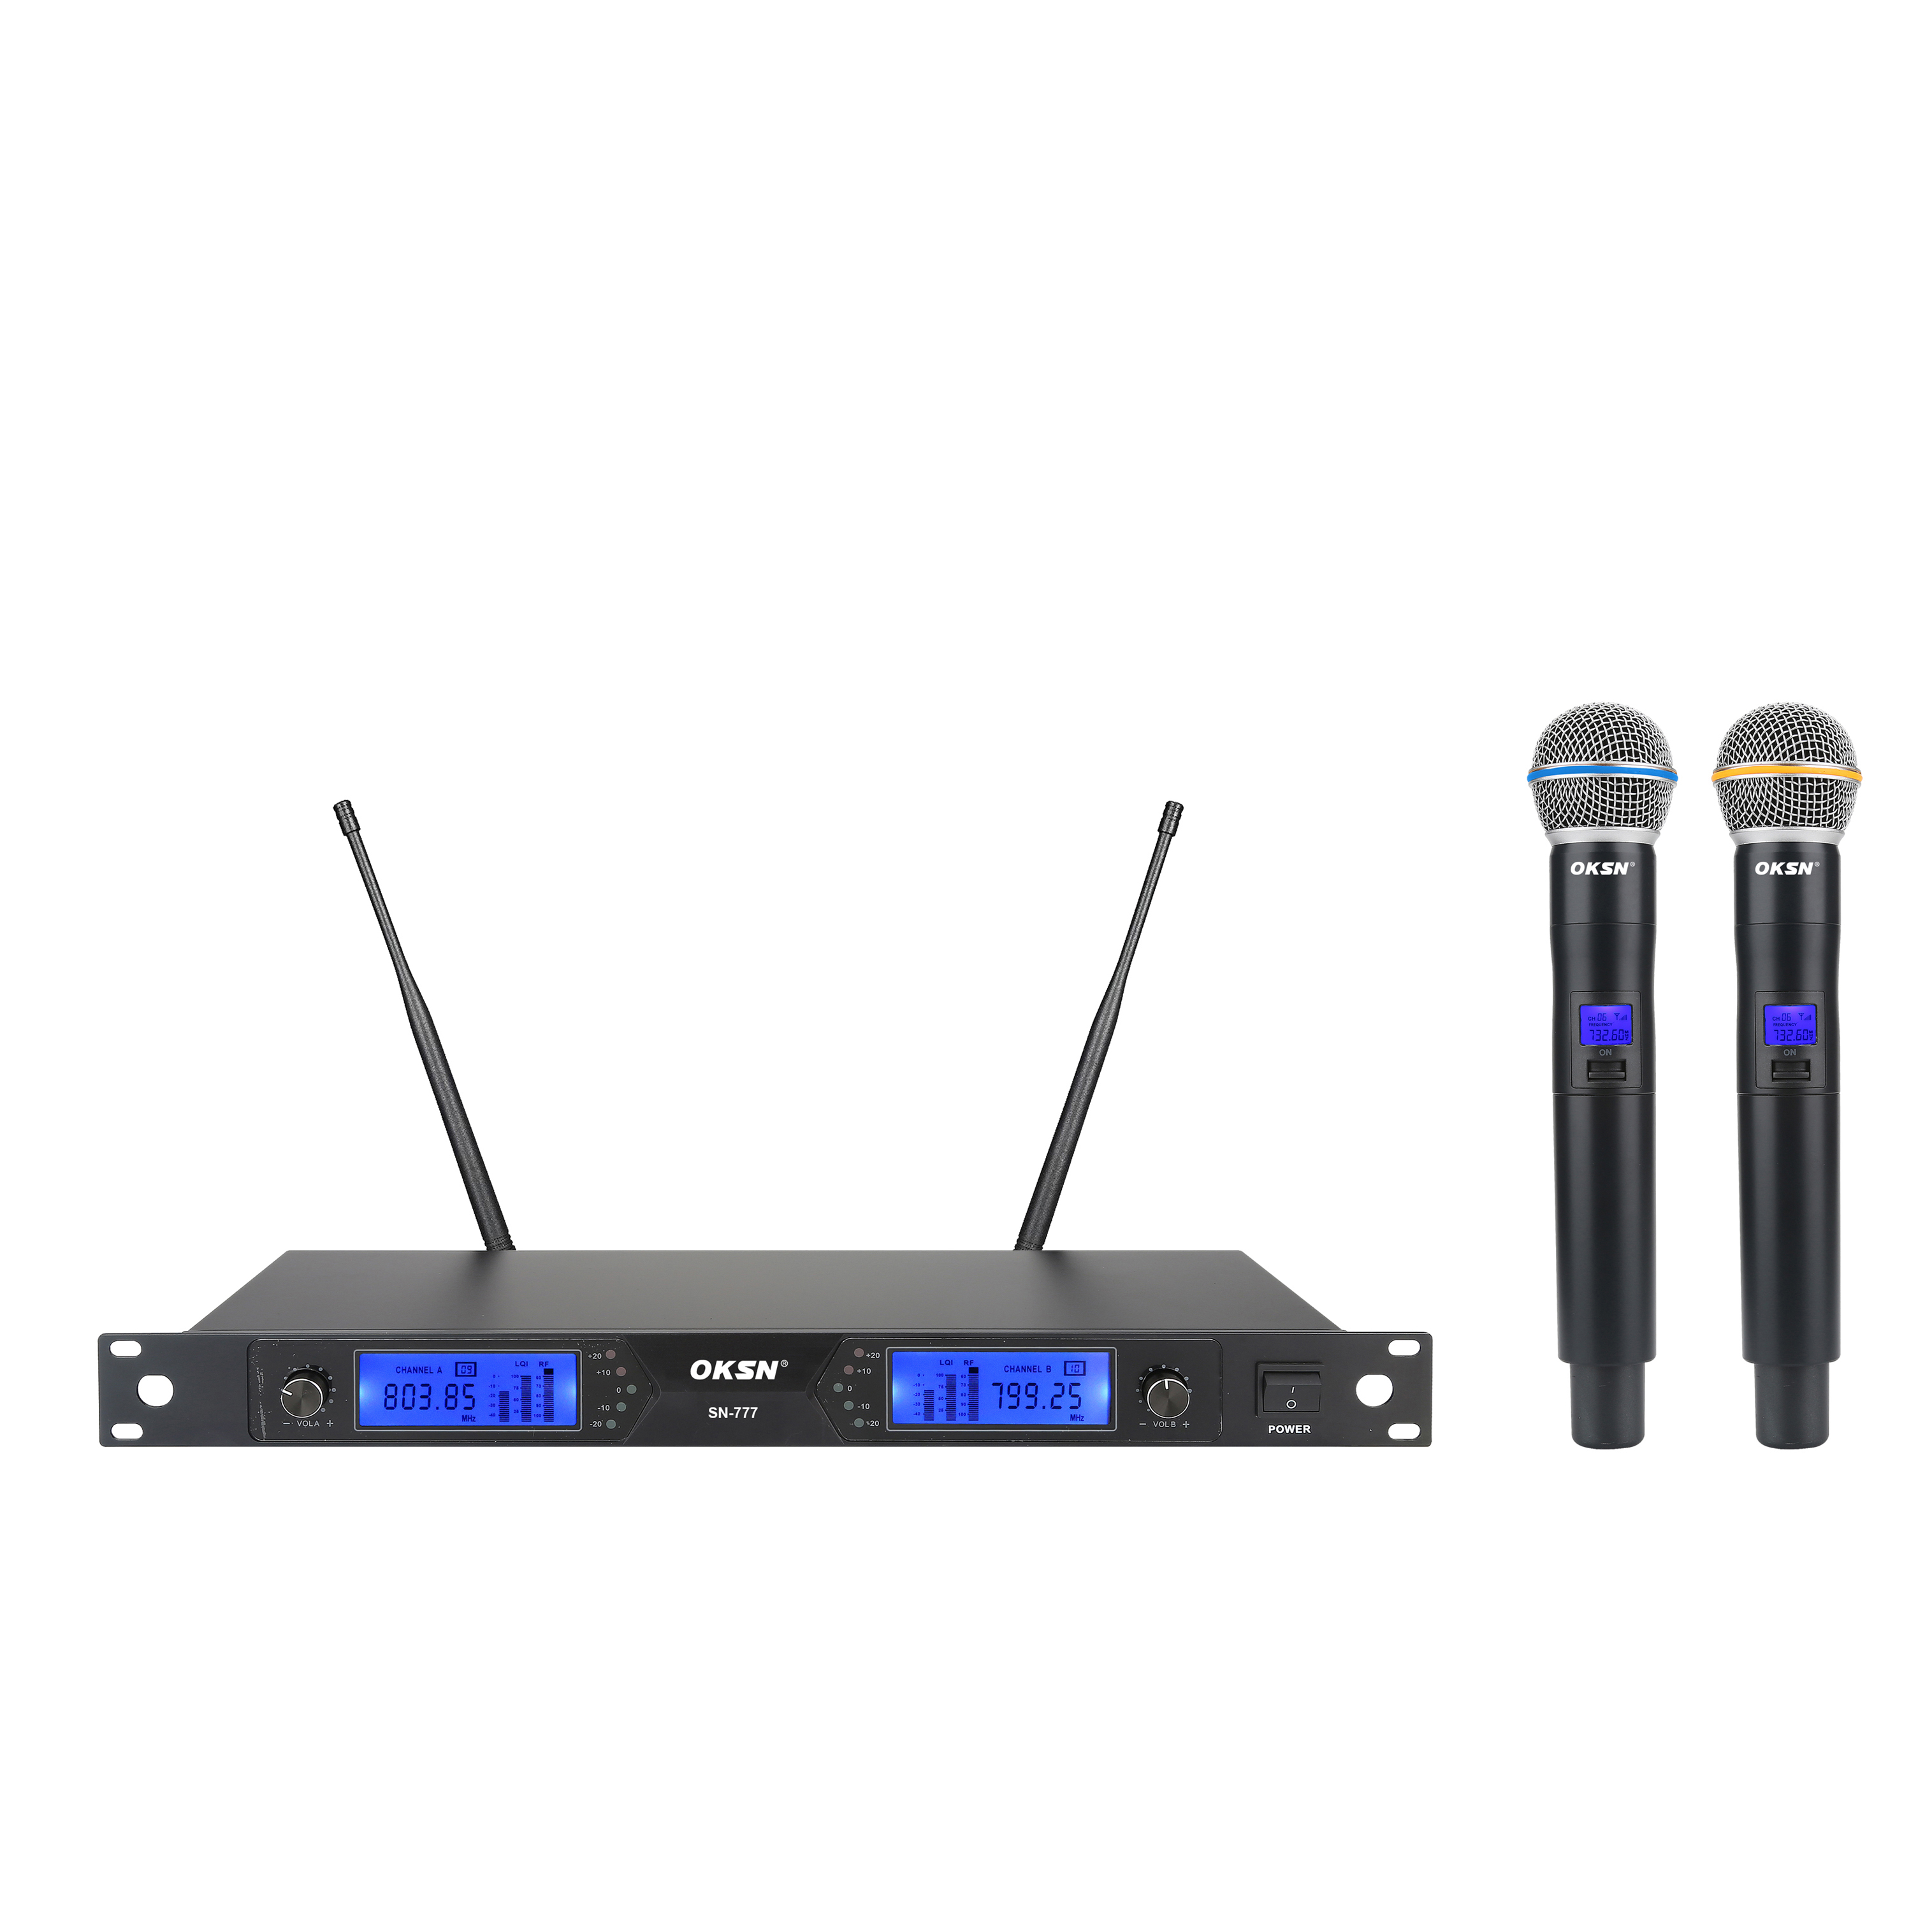 UHF Wireless Microphones: The Modern Alternative to Wired Microphones